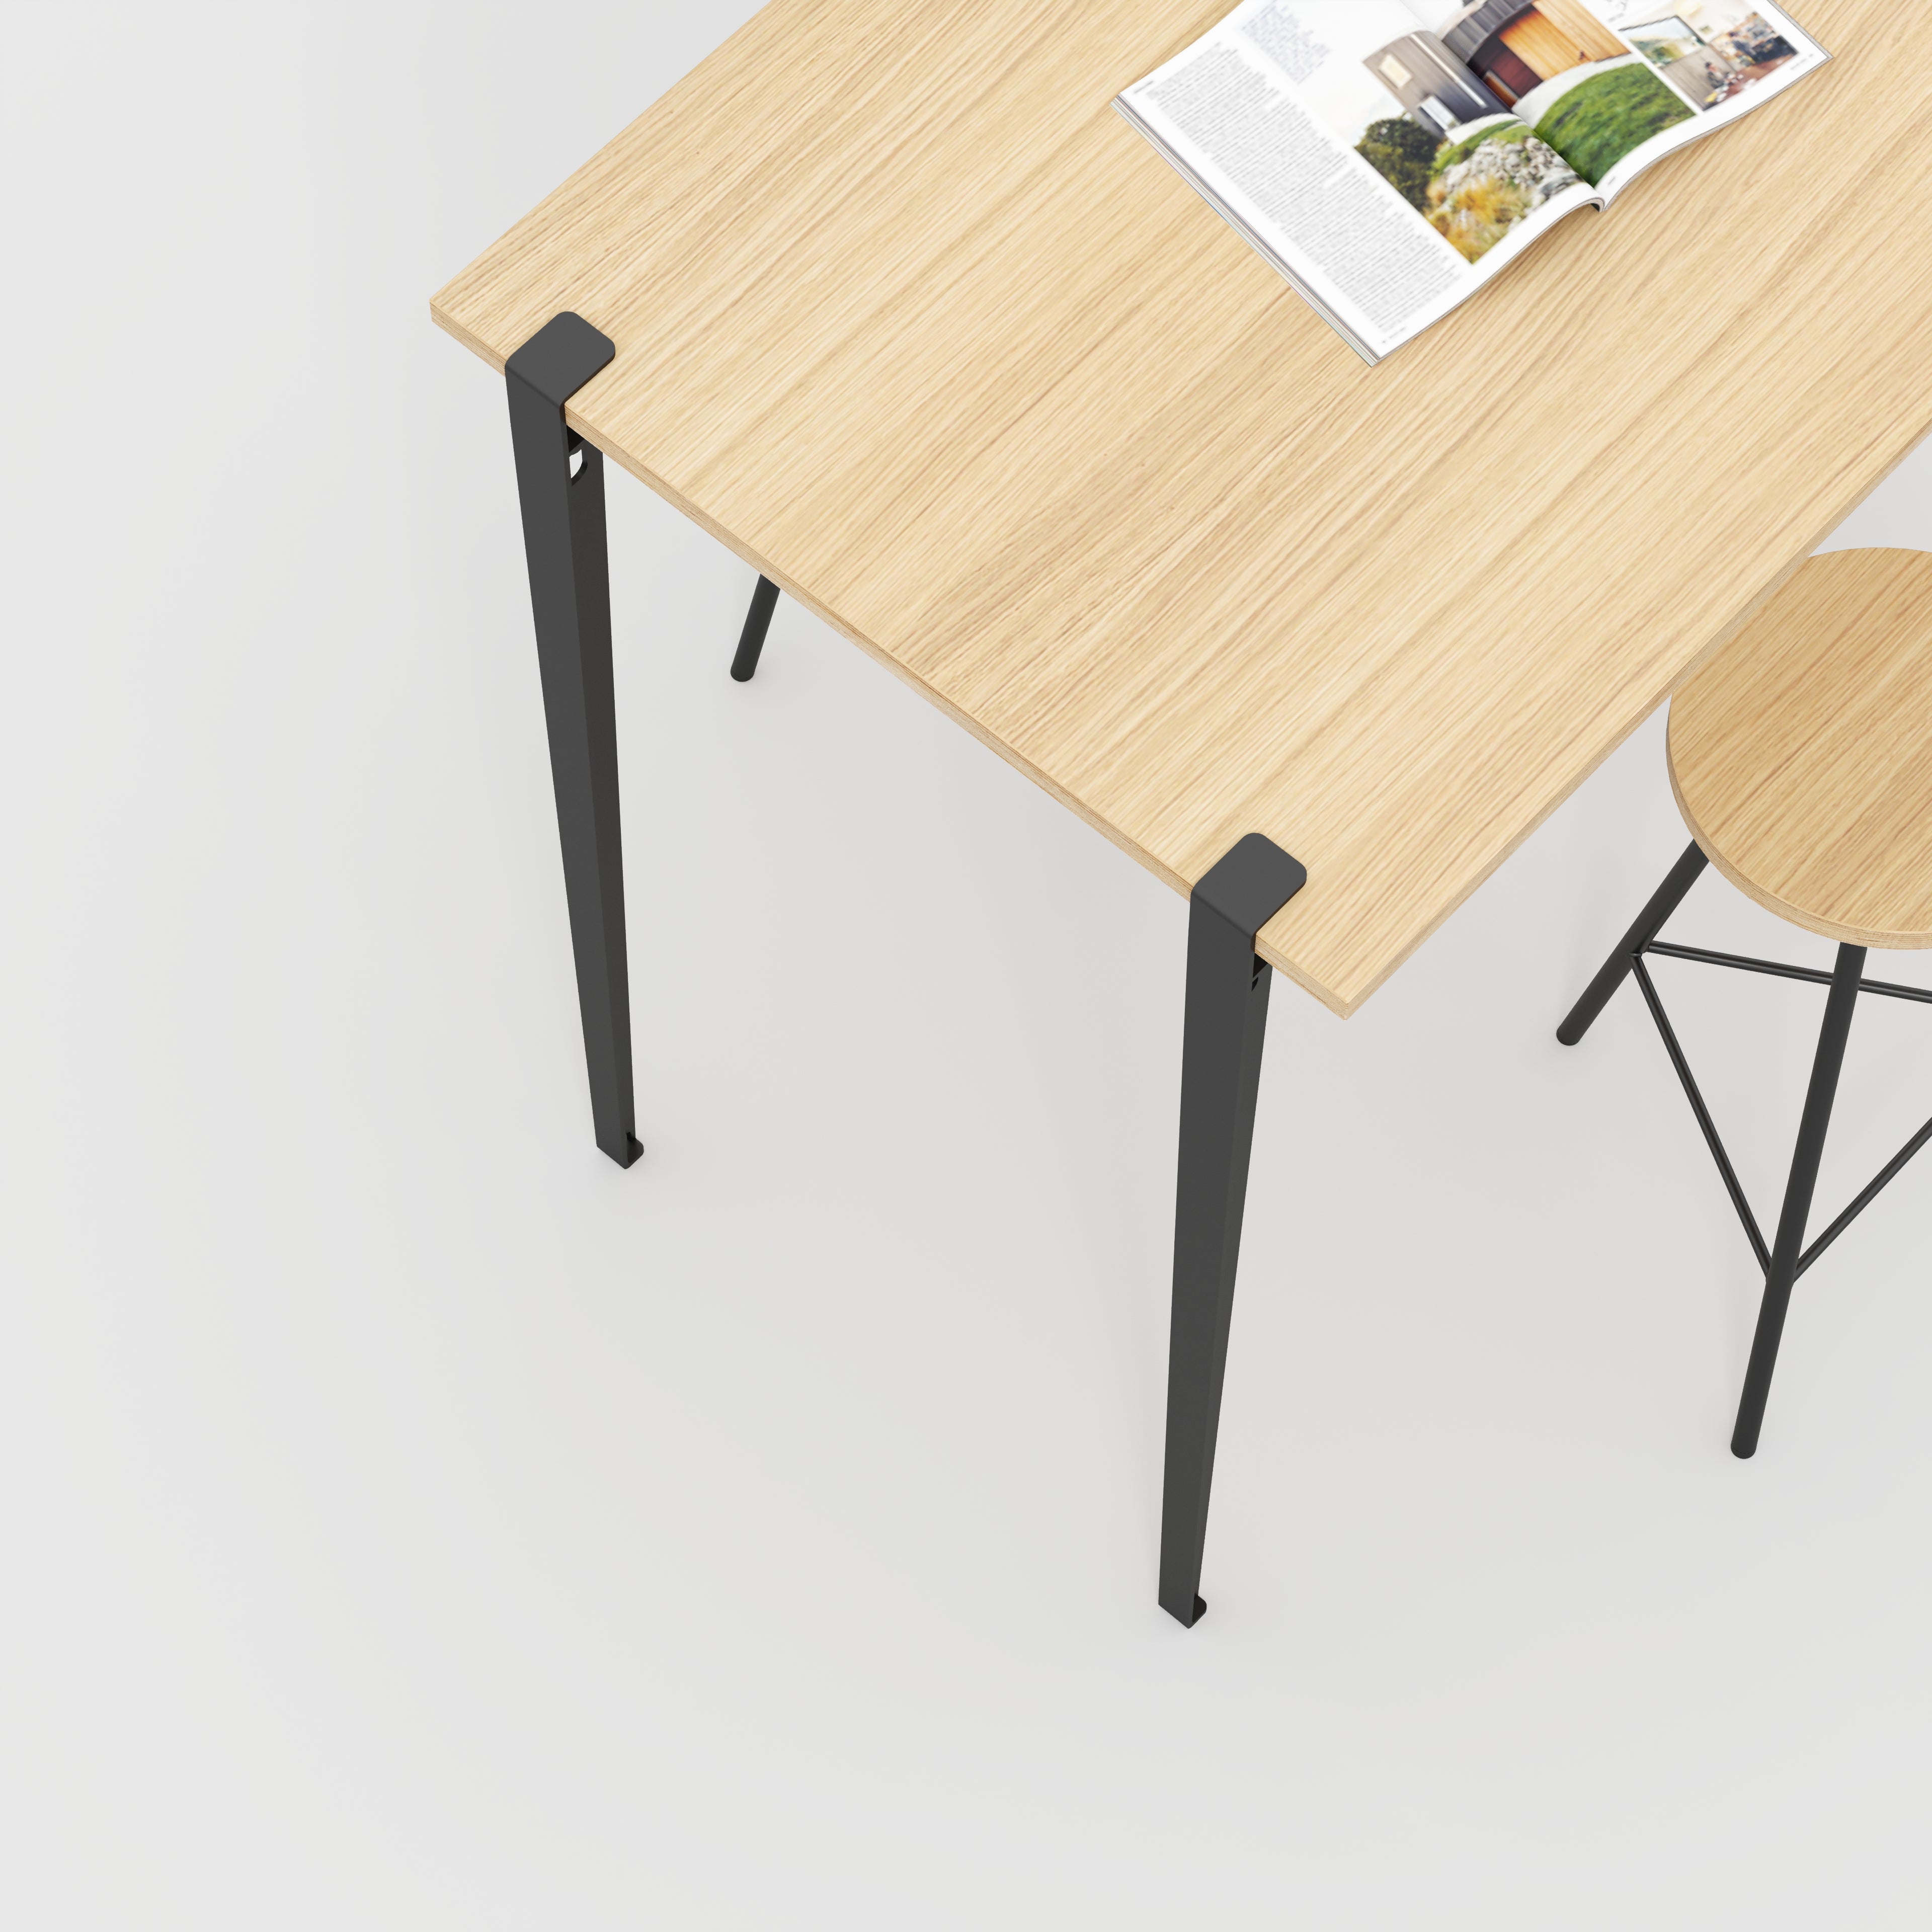 Wall Table with Black Tiptoe Legs and Brackets - Plywood Oak - 1200(w) x 800(d) x 1100(h)